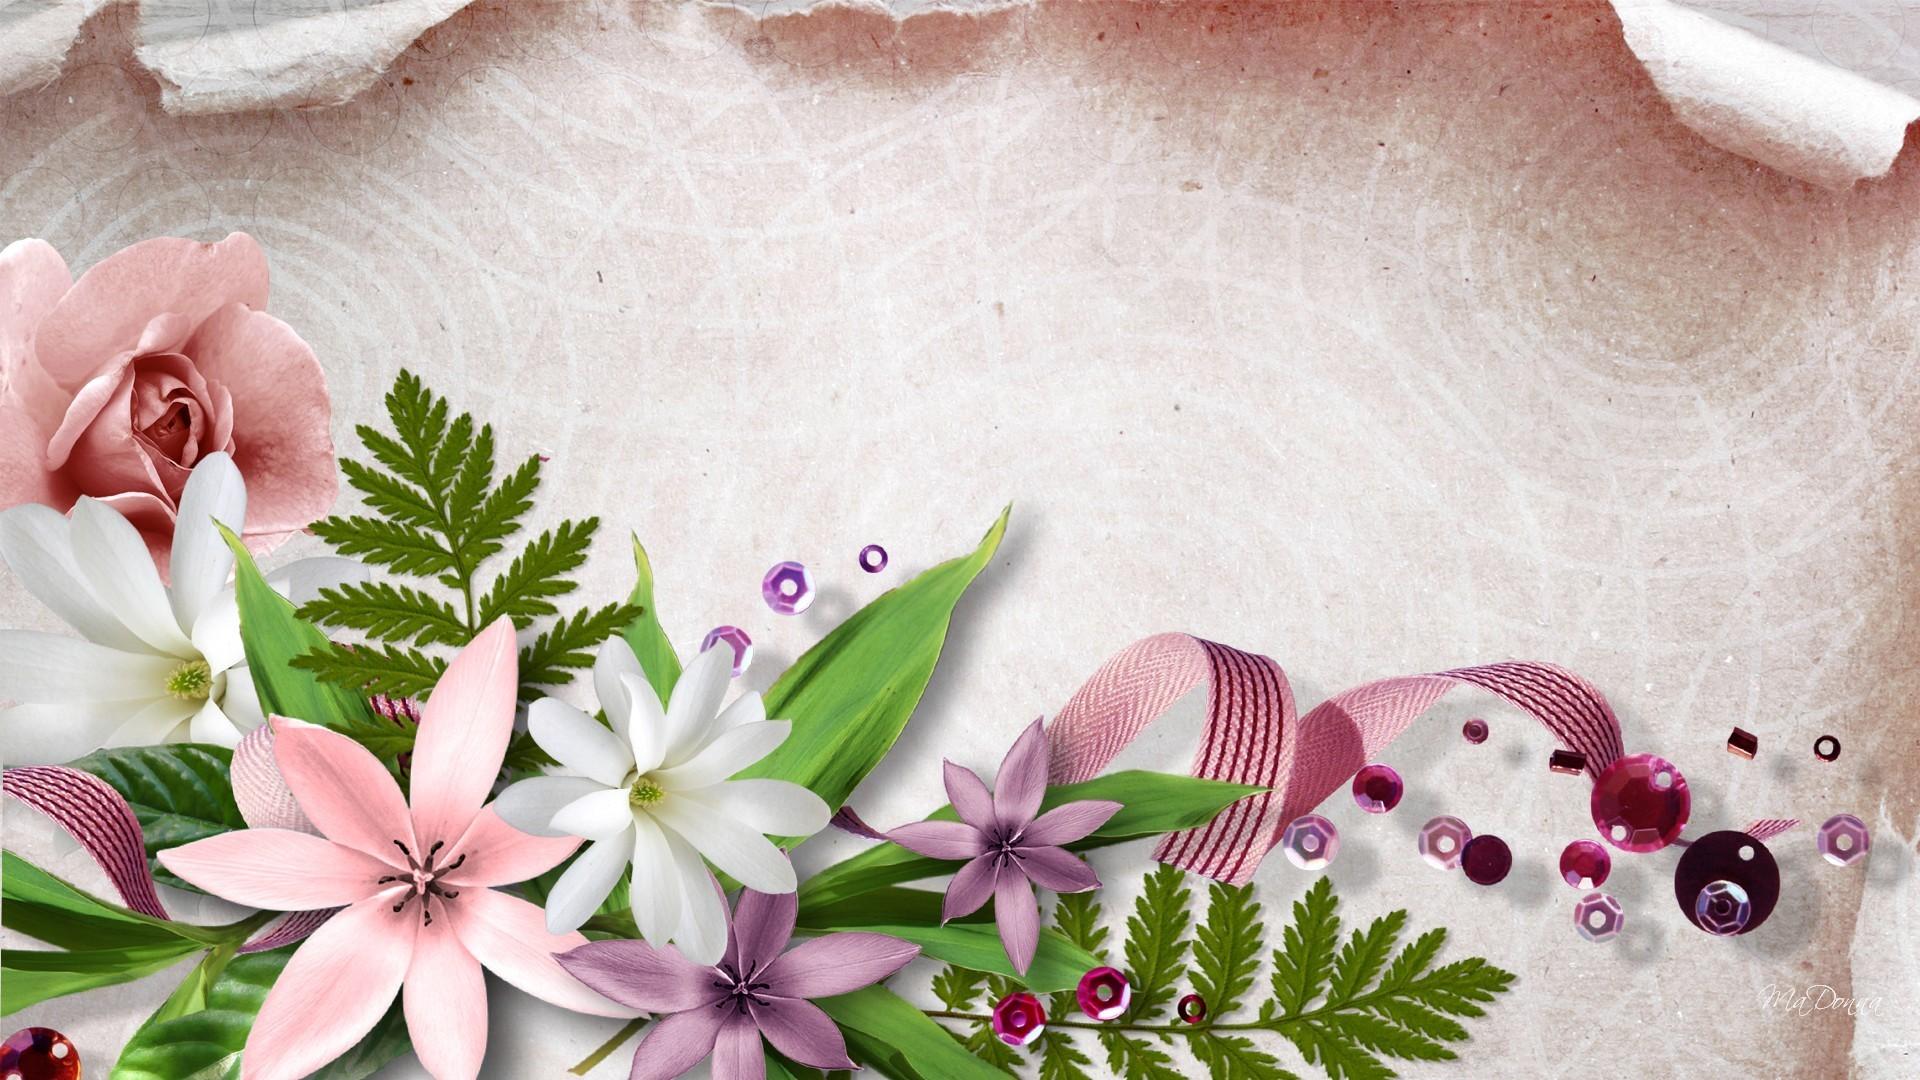 Flowers beads and ribbon wallpaper. PC